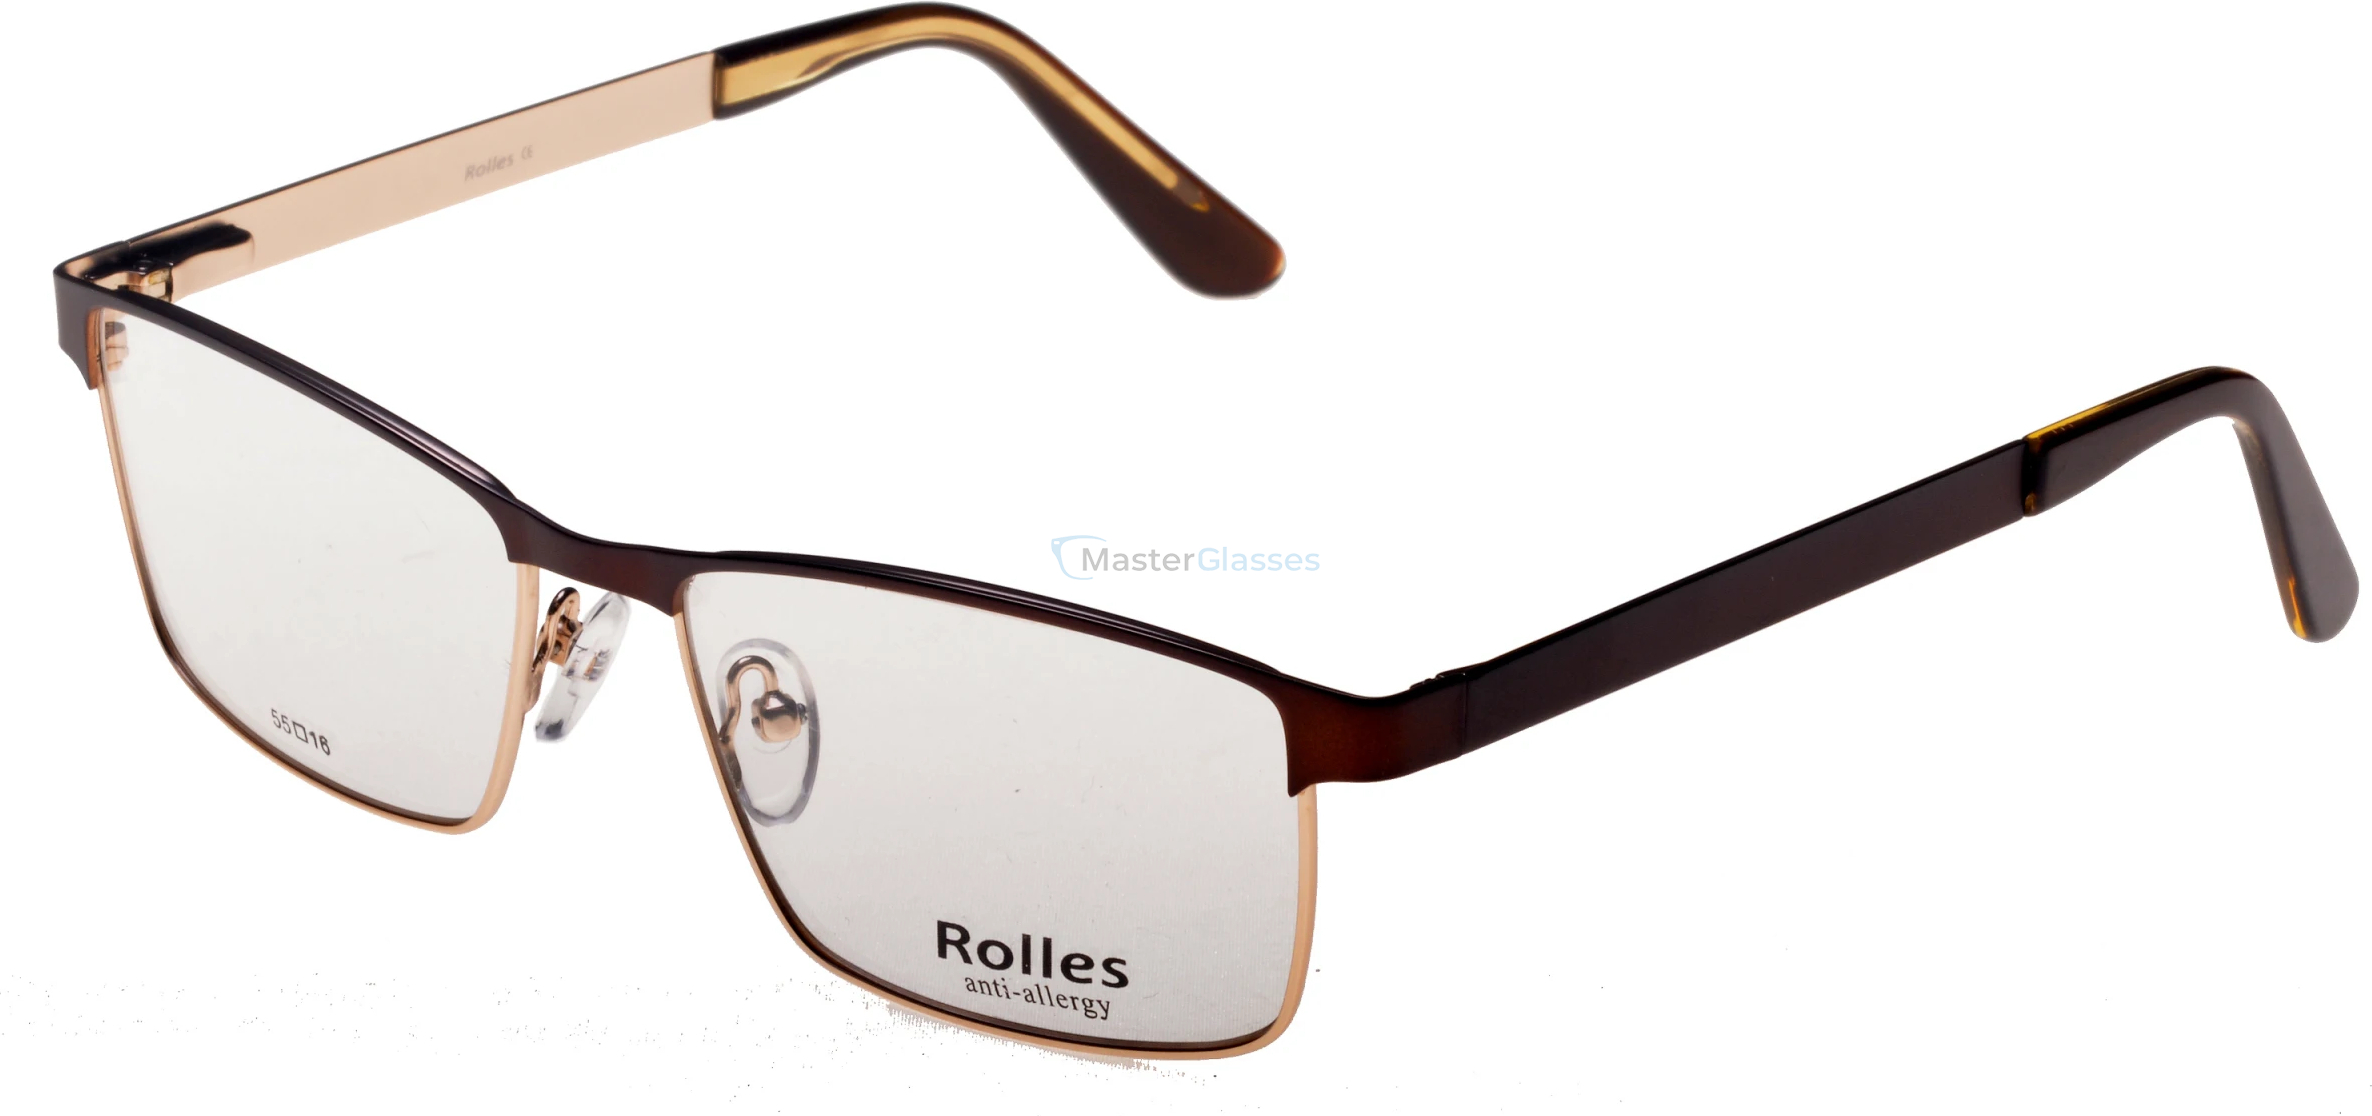  Rolles 580 02